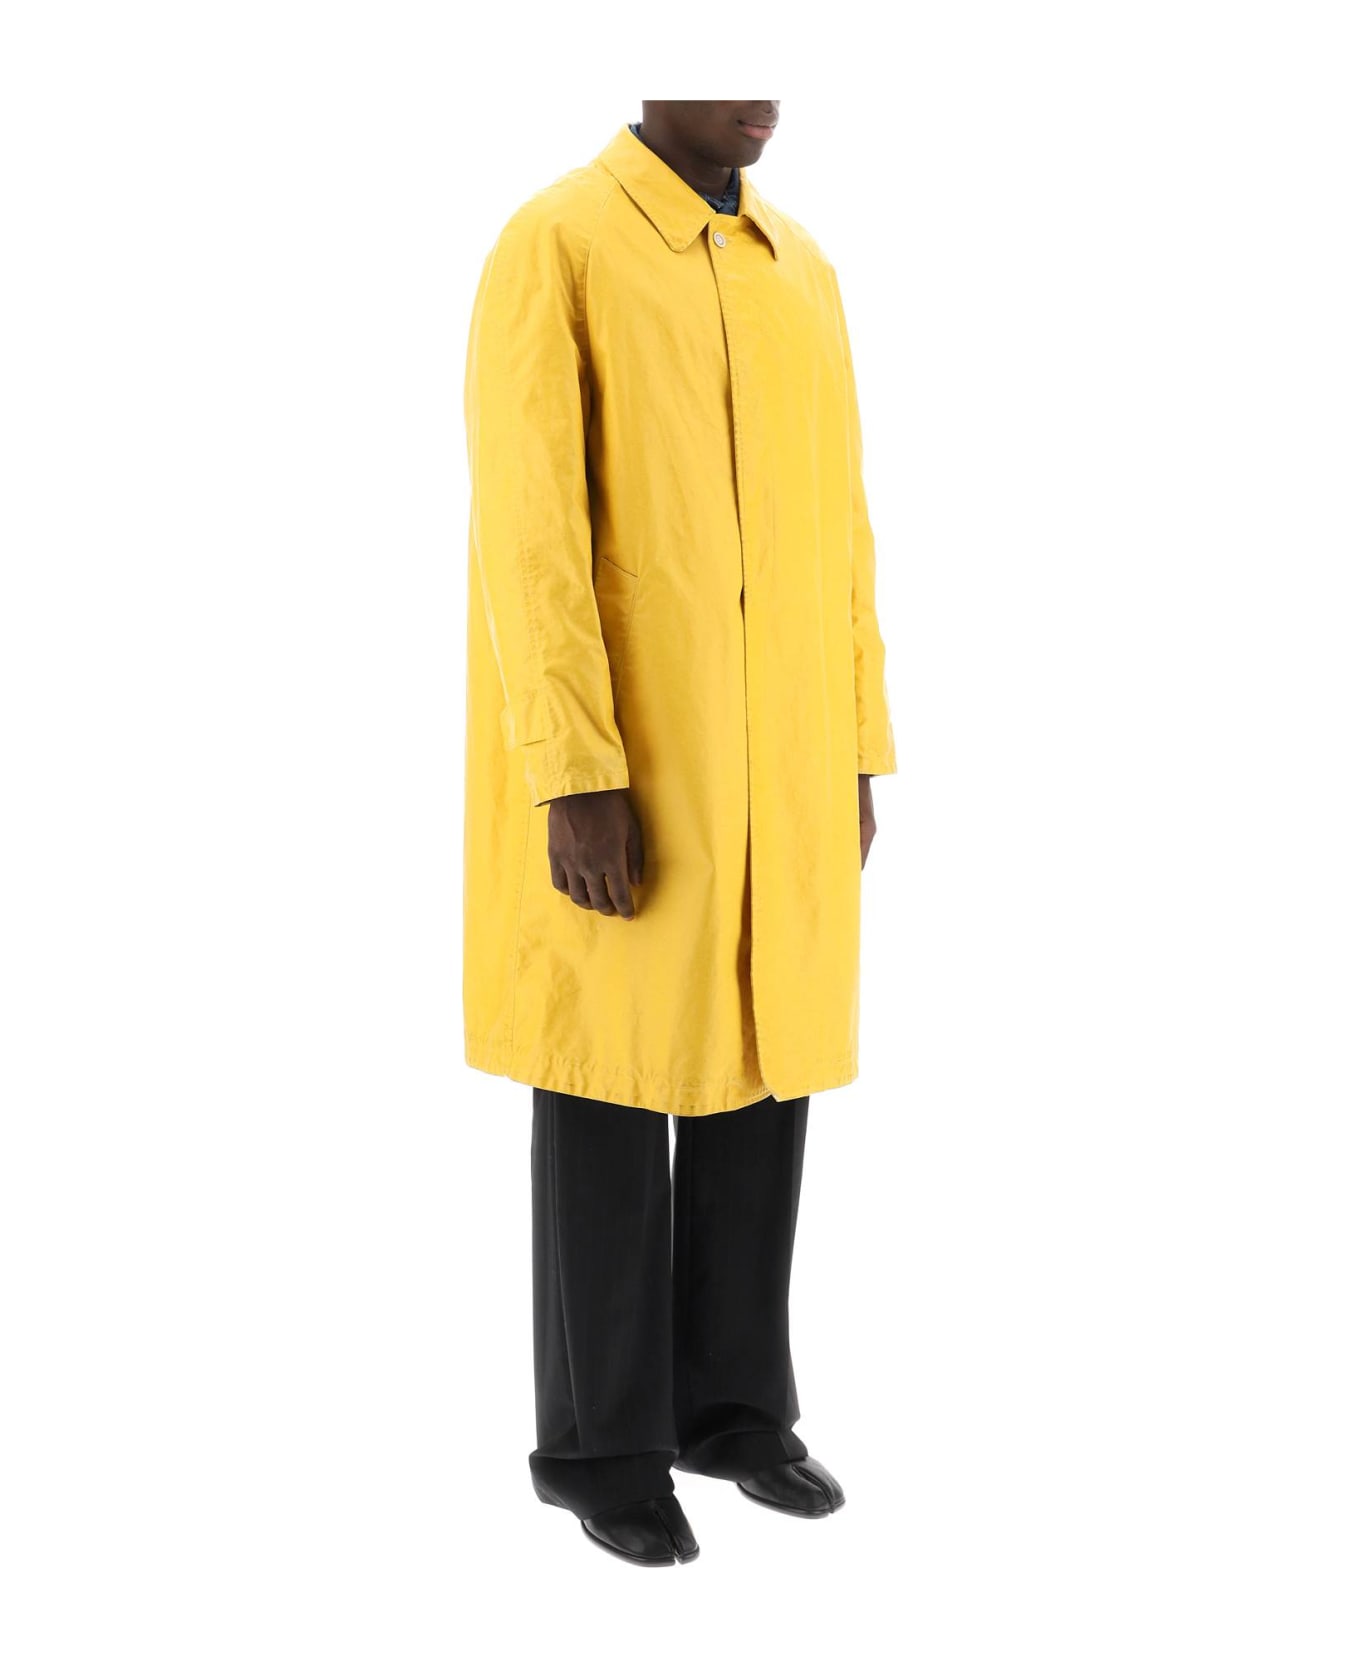 Maison Margiela Trench Coat In Worn-out Effect Coated Cotton - YELLOW (Yellow) コート